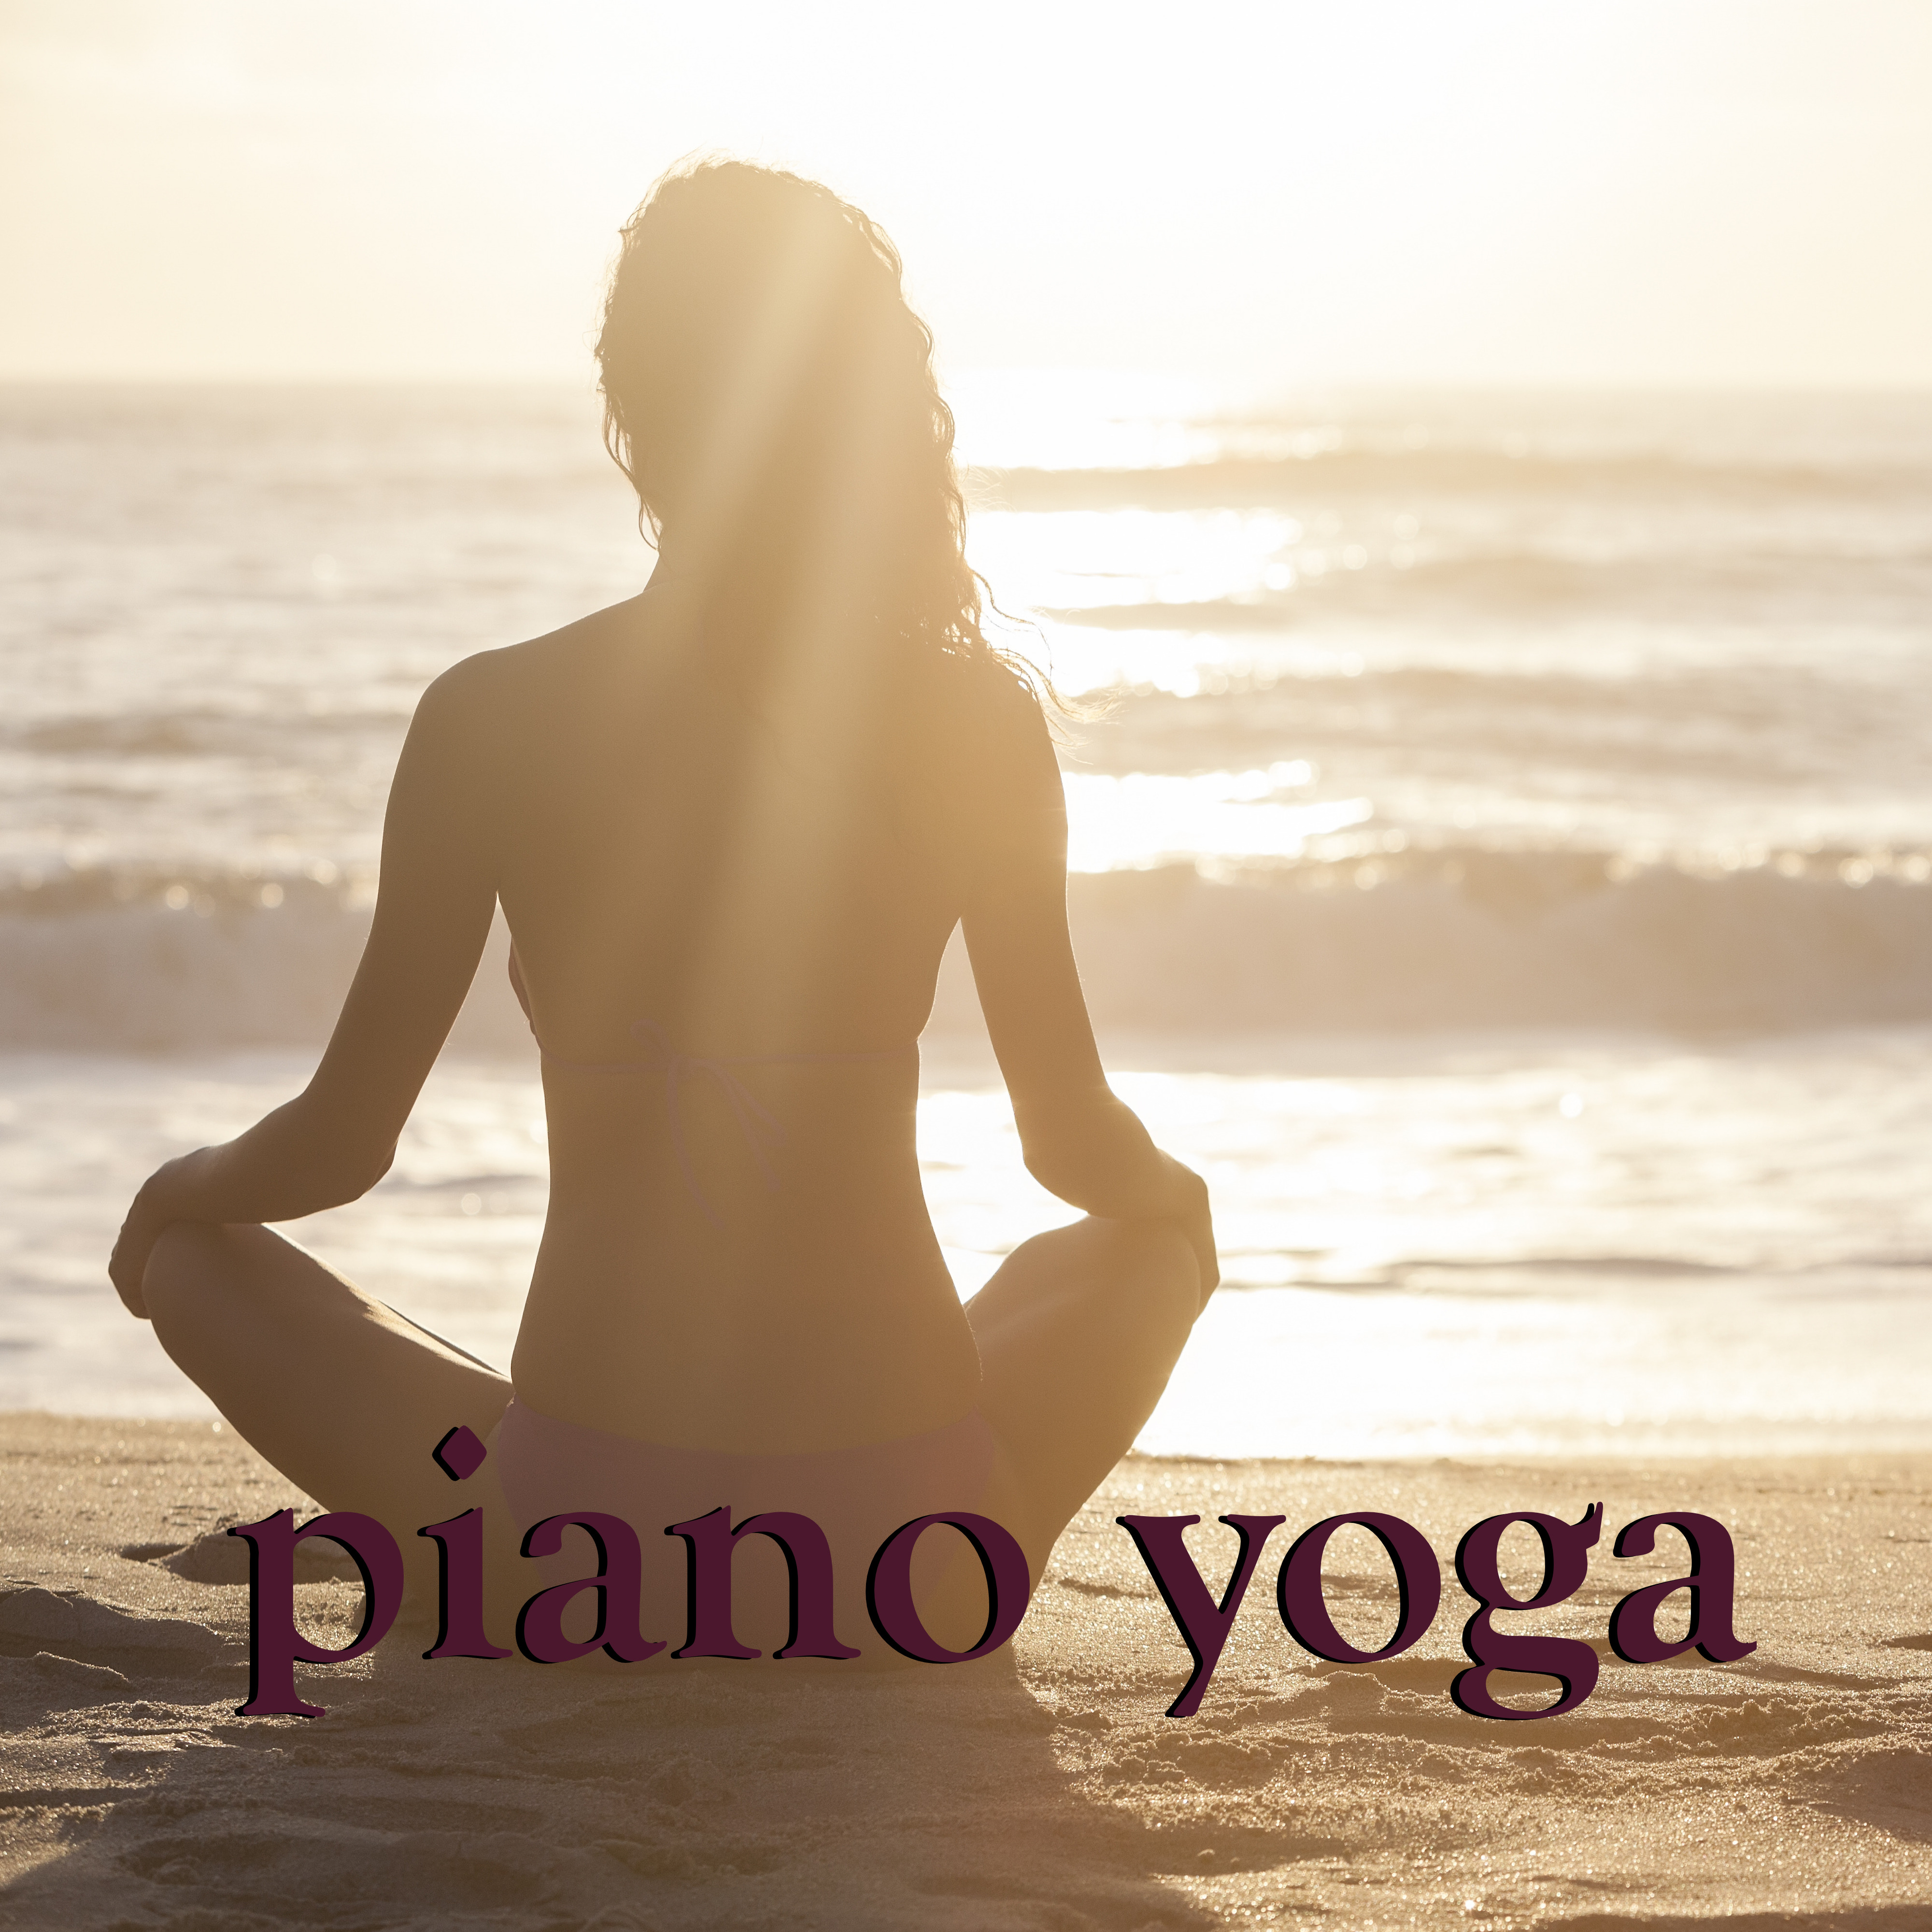 Piano Yoga - Yoga & Pilates Music with Piano Instrumental and Relaxing Background Music